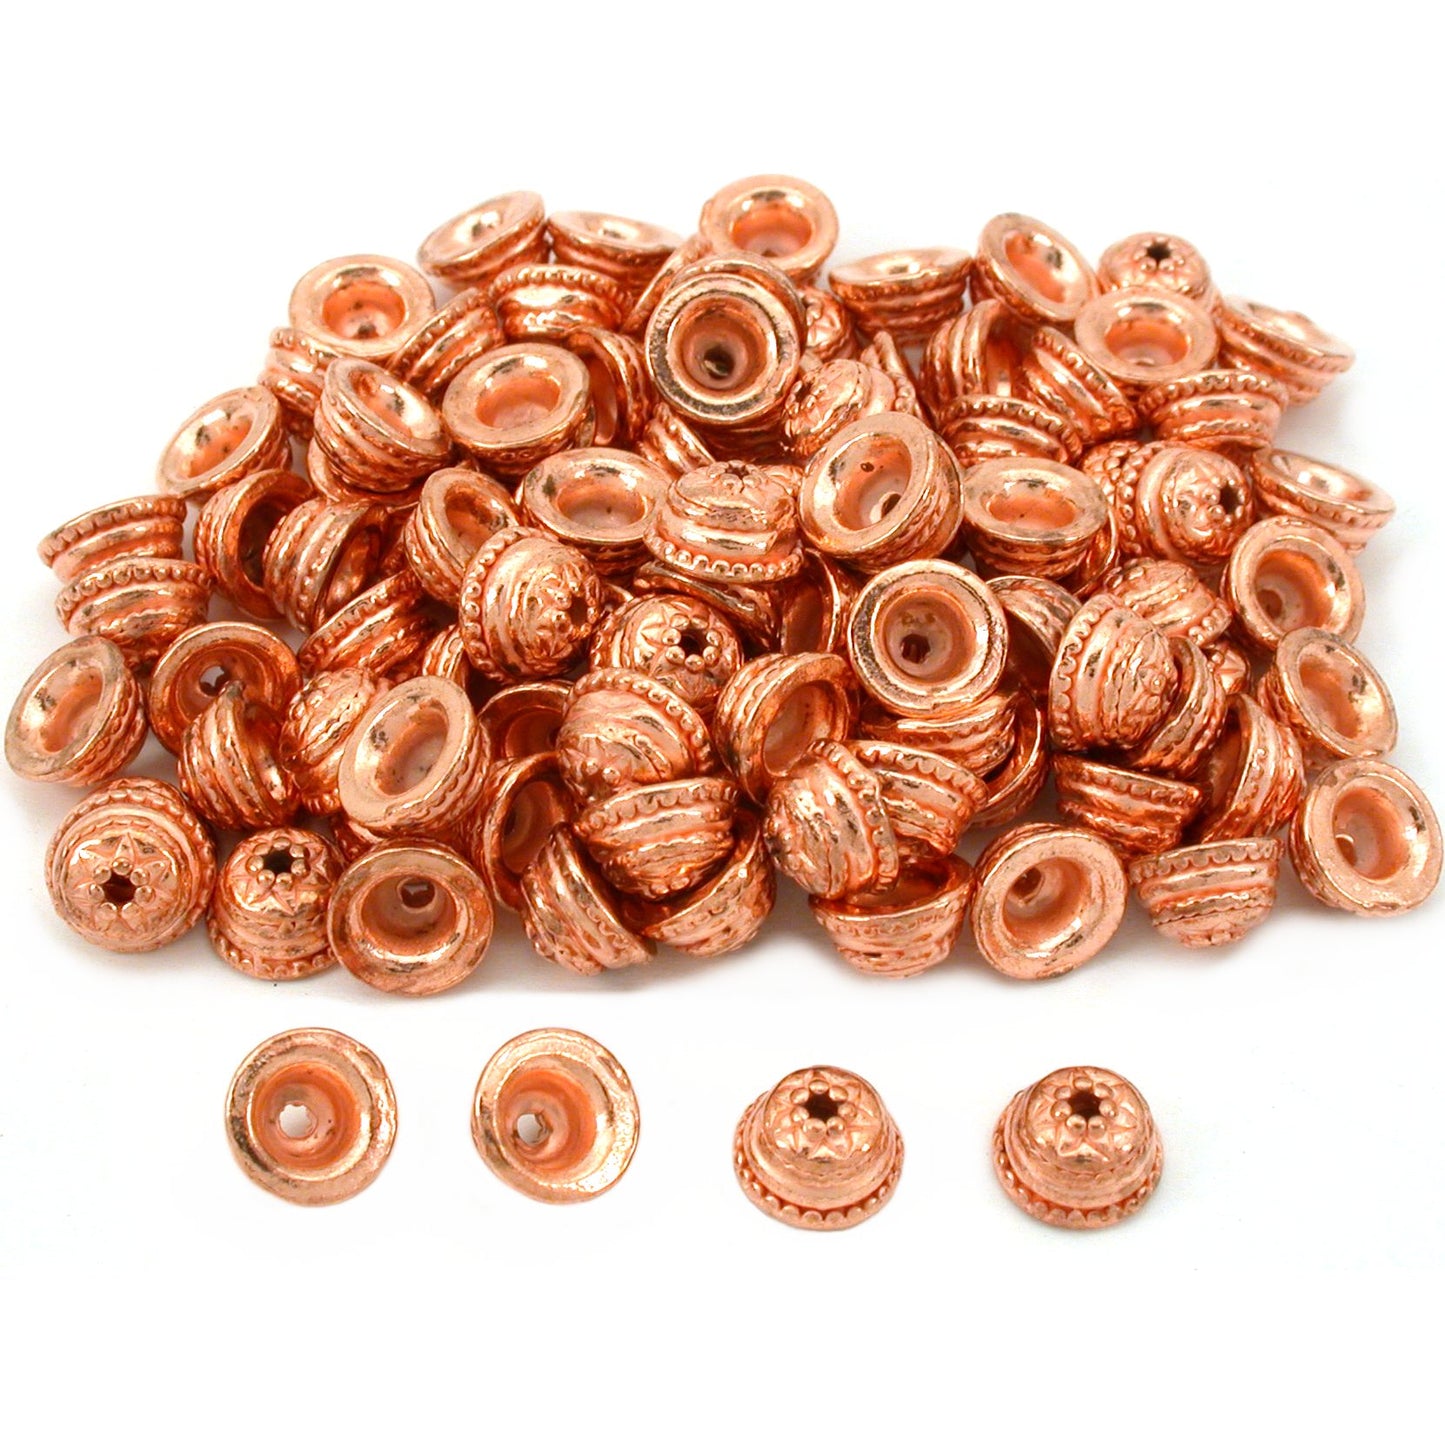 Star Bali End Bead Caps Copper Plated 9.5mm Approx 100